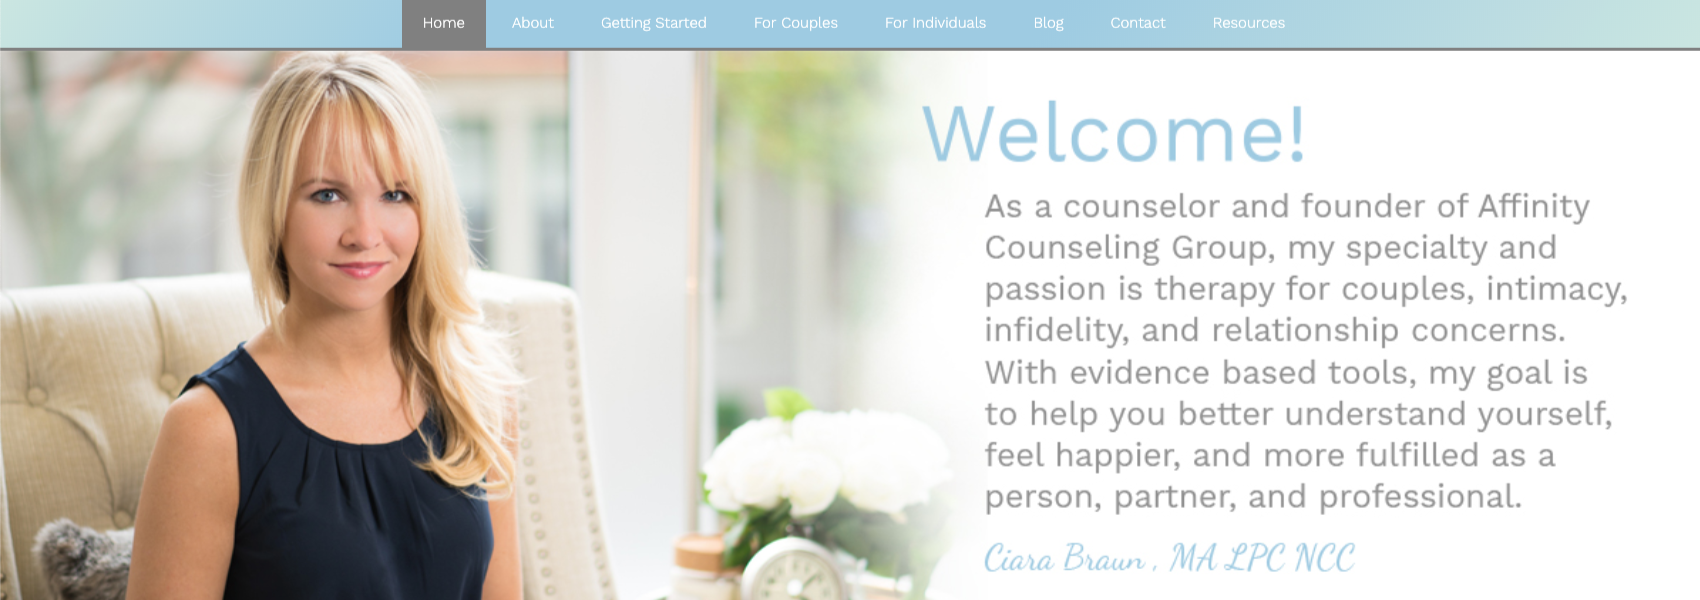 Therapist Home page example | Dear BV: How Much Content Do I Need on My Home Page? | Brighter Vision | Marketing Blog for Therapists